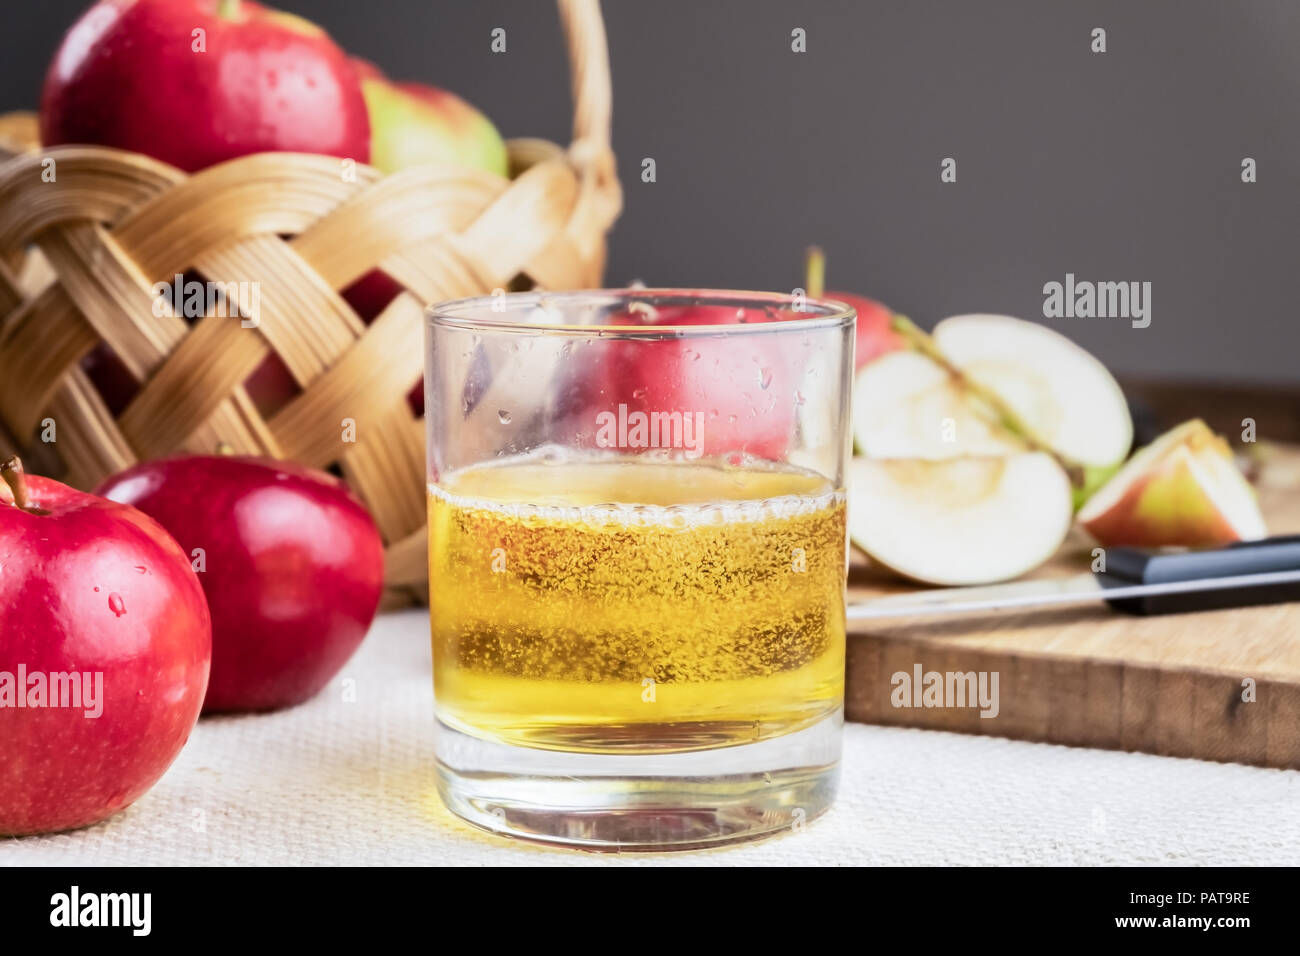 Close-up image of cidre drink and ripe juicy apples on rustic wooden table. Glass of home made cider and locally grown organic apples Stock Photo